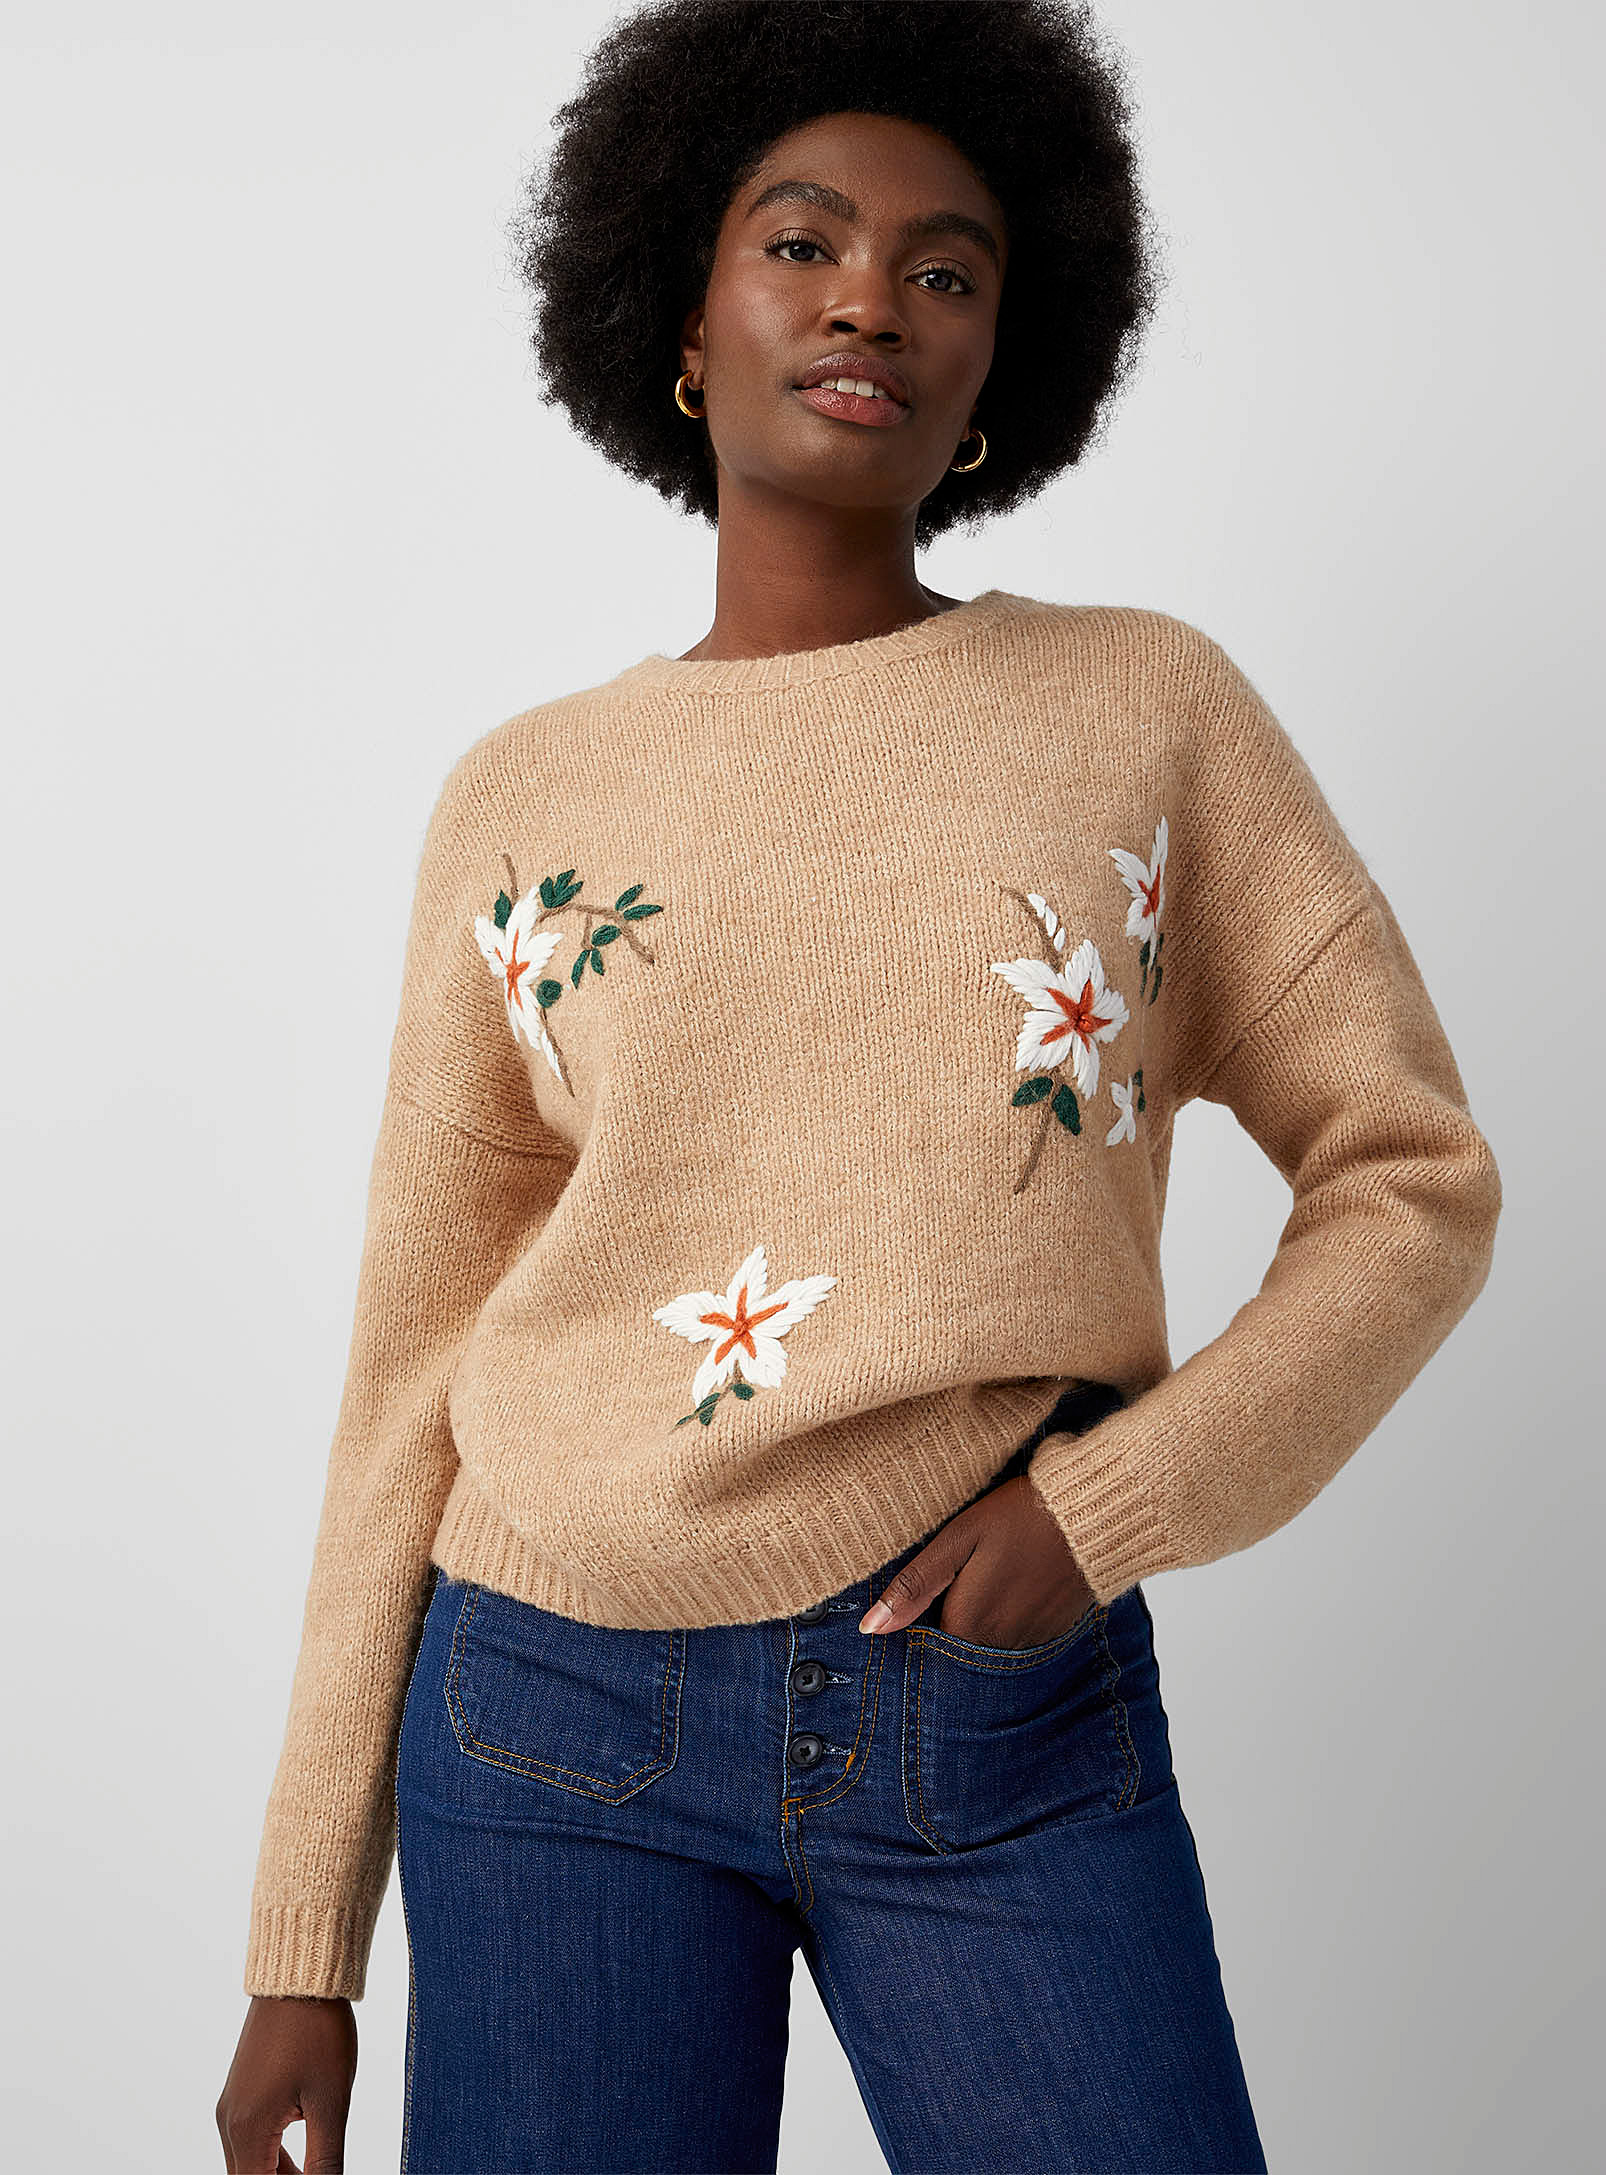 Contemporaine - Women's Floral embroidery sweater